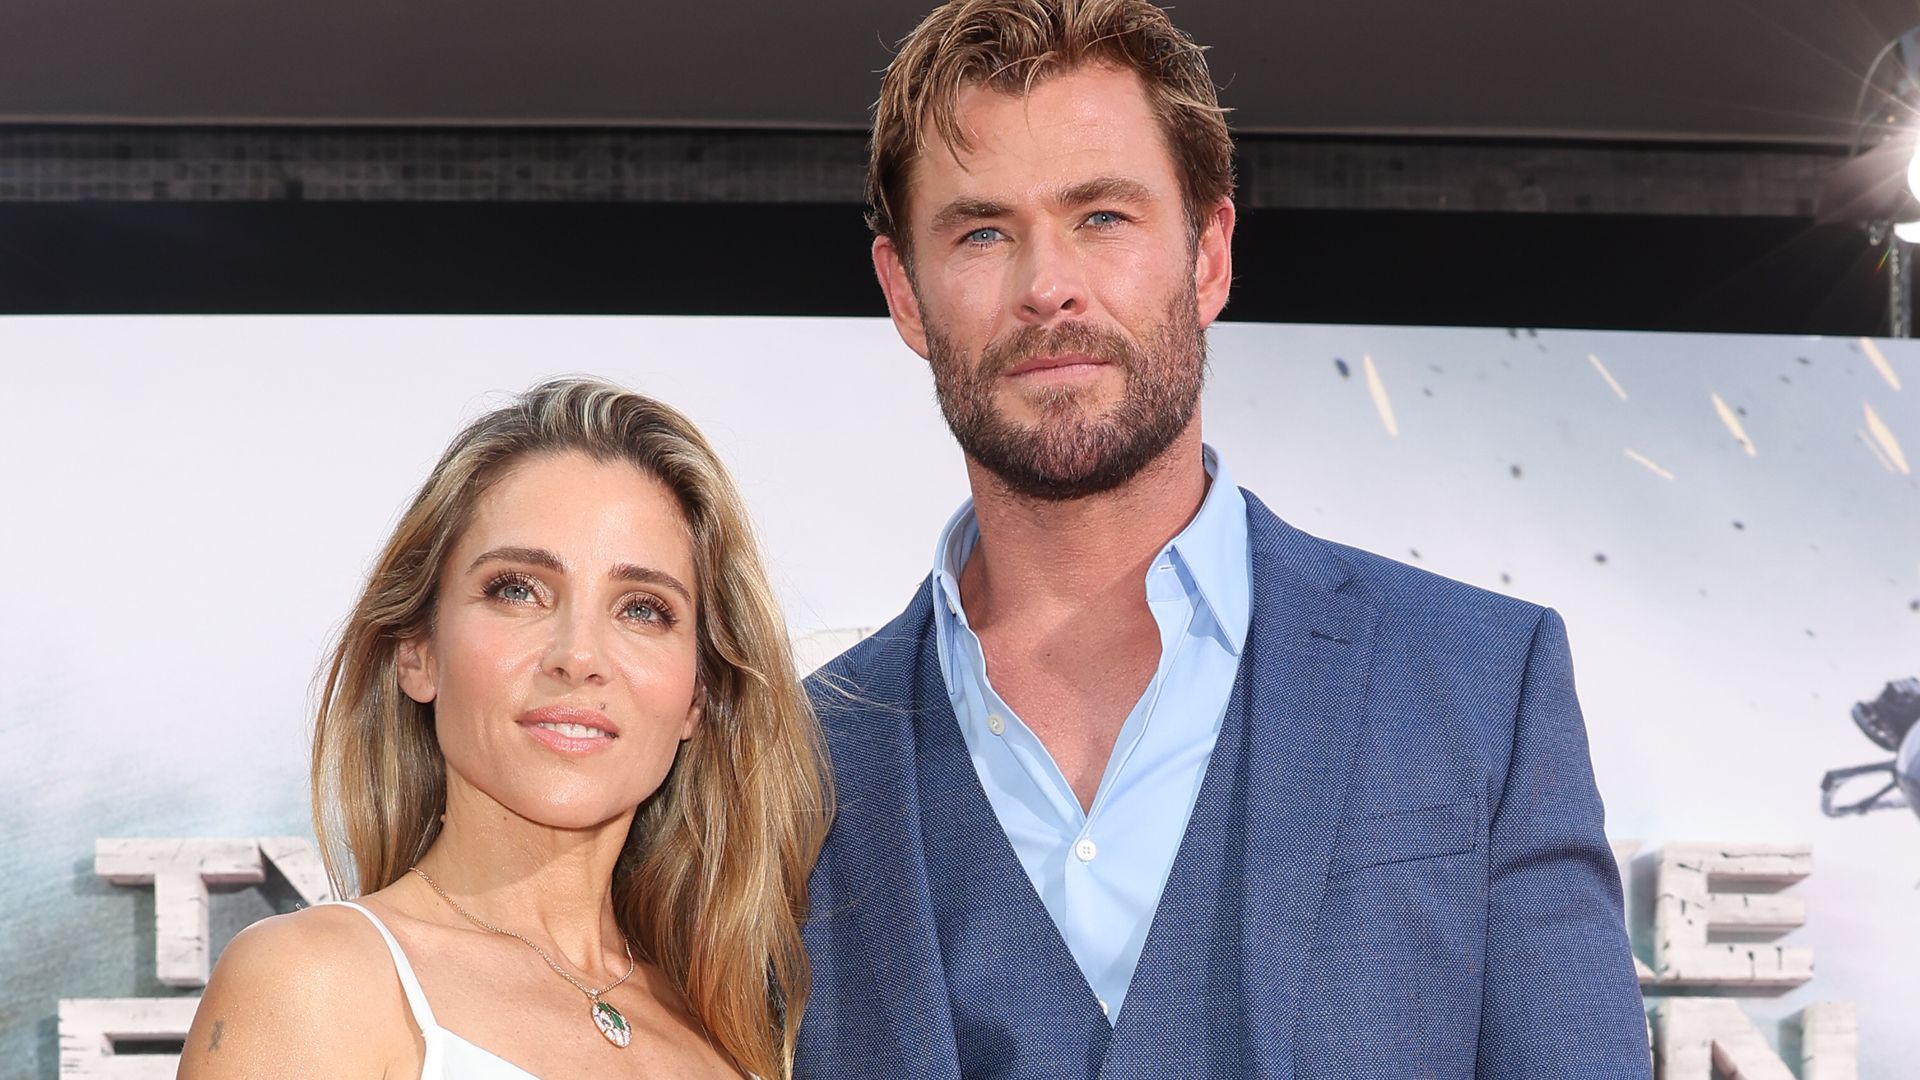 Chris Hemsworth and Elsa Pataky spend time apart as they vacation